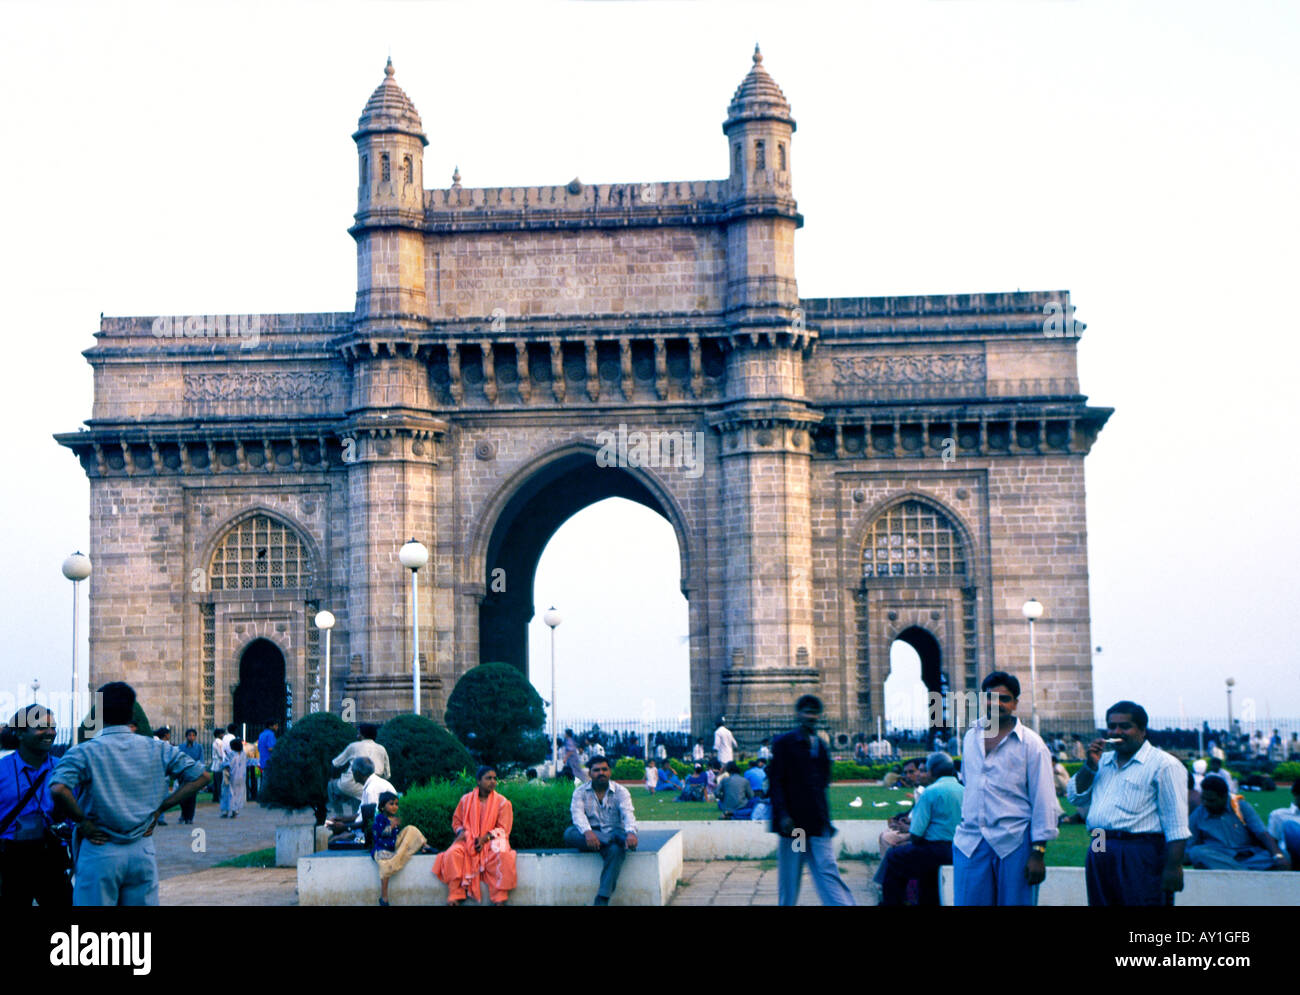 Mumbai's most famous monument the Gateway of India commemorates the first visit of a British Monarch to India George V in 1911. Stock Photo